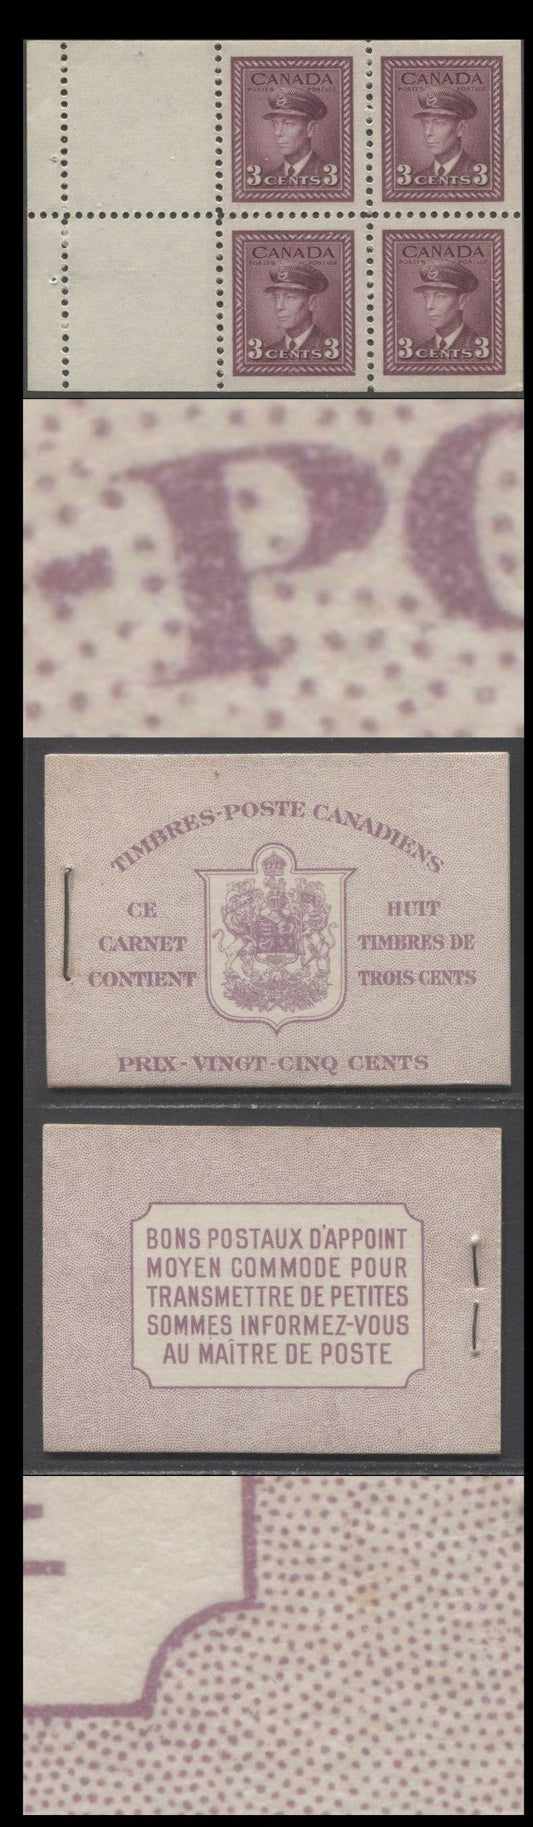 Lot 73 Canada #BK35bF 1942-1947 War Issue, A Complete 25c French Booklet, 2 Panes Of 4+2 Labels 3c Rose Violet, Front Cover IIn, Back Cover Diii, Type II, 7c & 6c Rates, 61,000 Issued